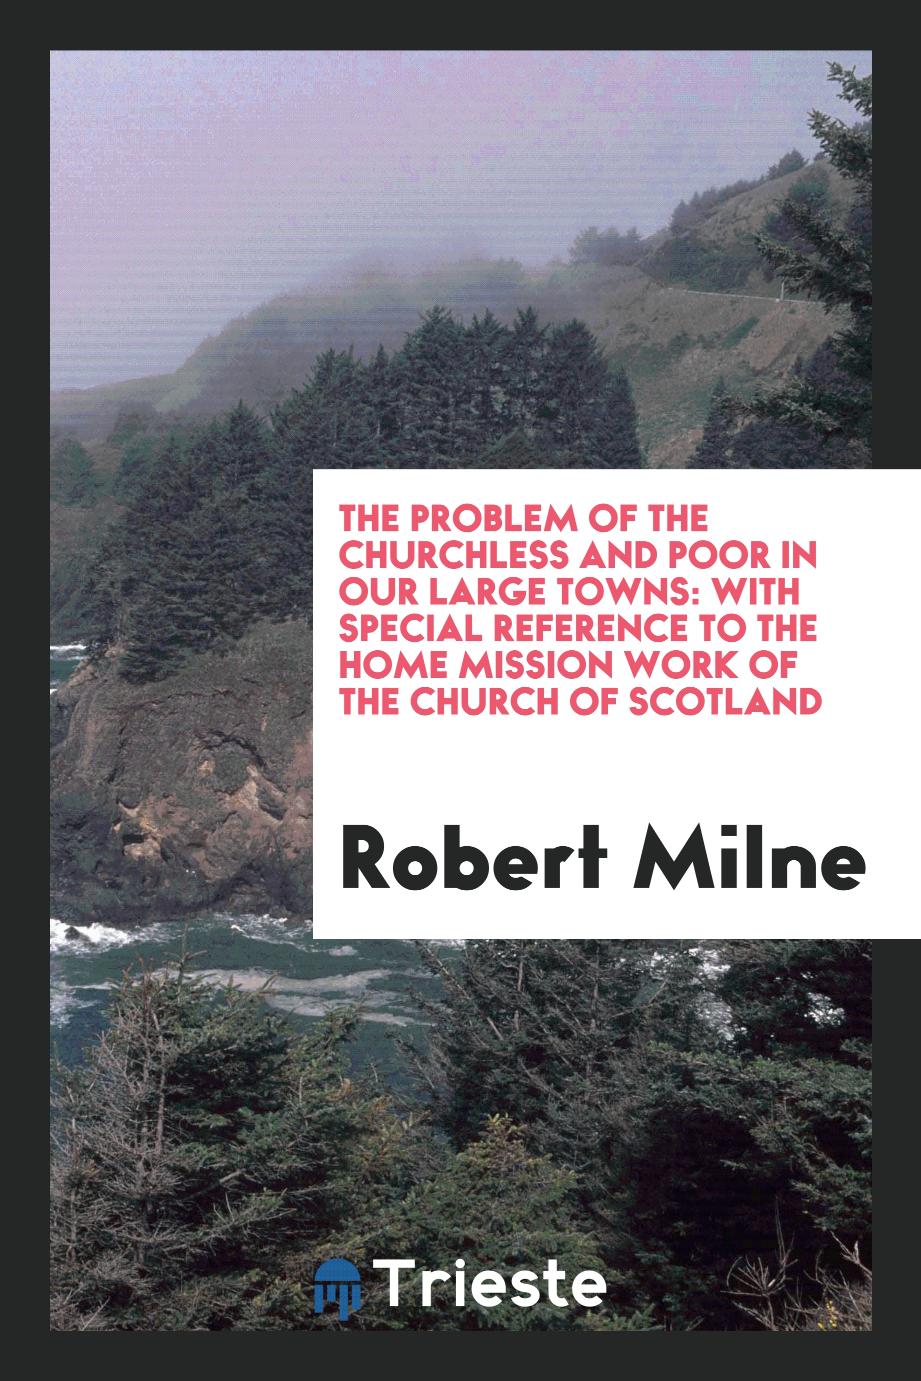 The problem of the churchless and poor in our large towns: with special reference to the home mission work of the Church of Scotland